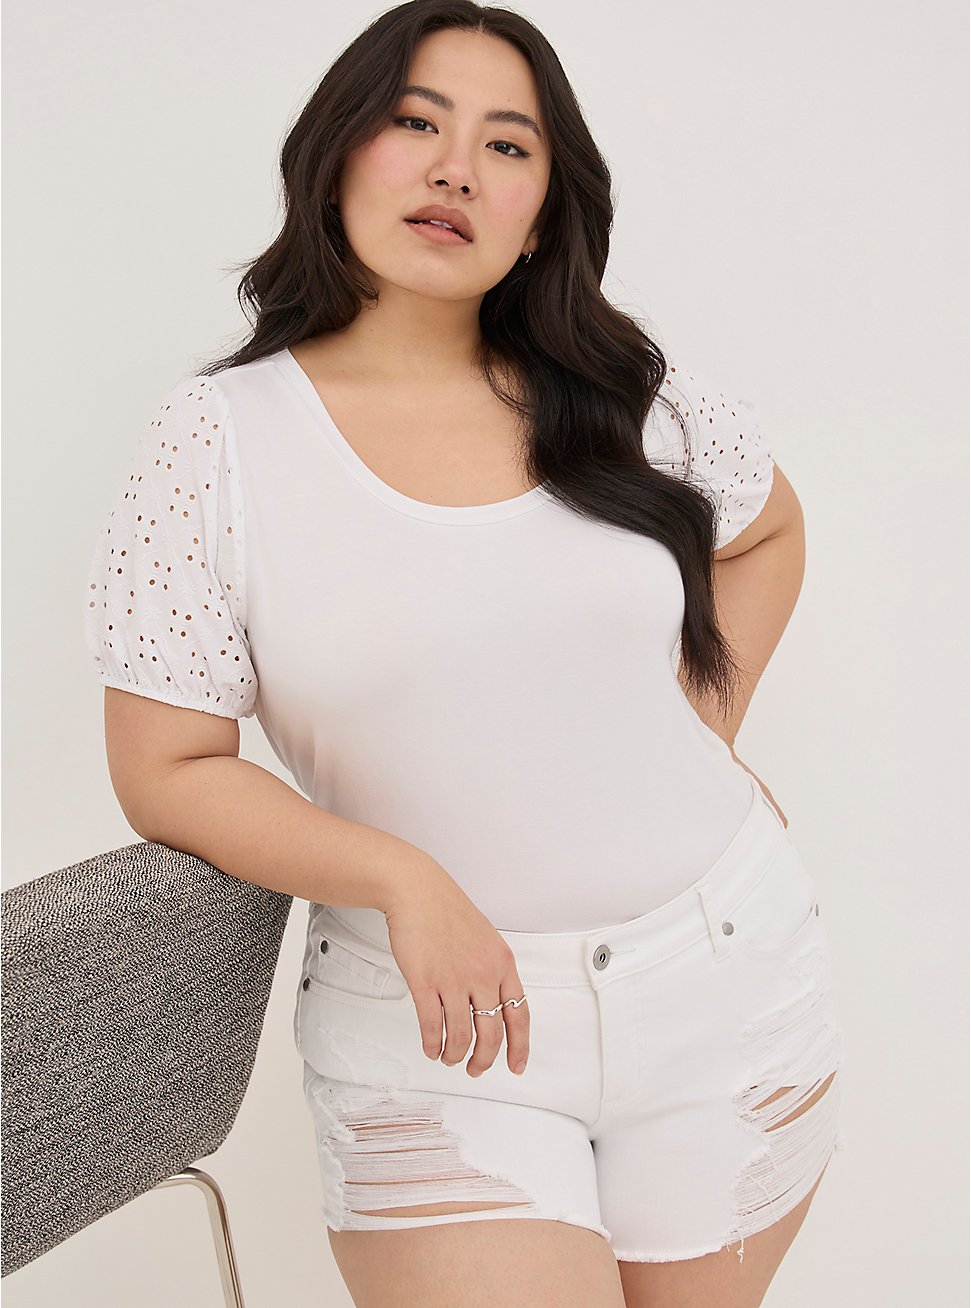 Classic Fit Super Soft Scoop Neck Eyelet Sleeve Tee, BRIGHT WHITE, hi-res